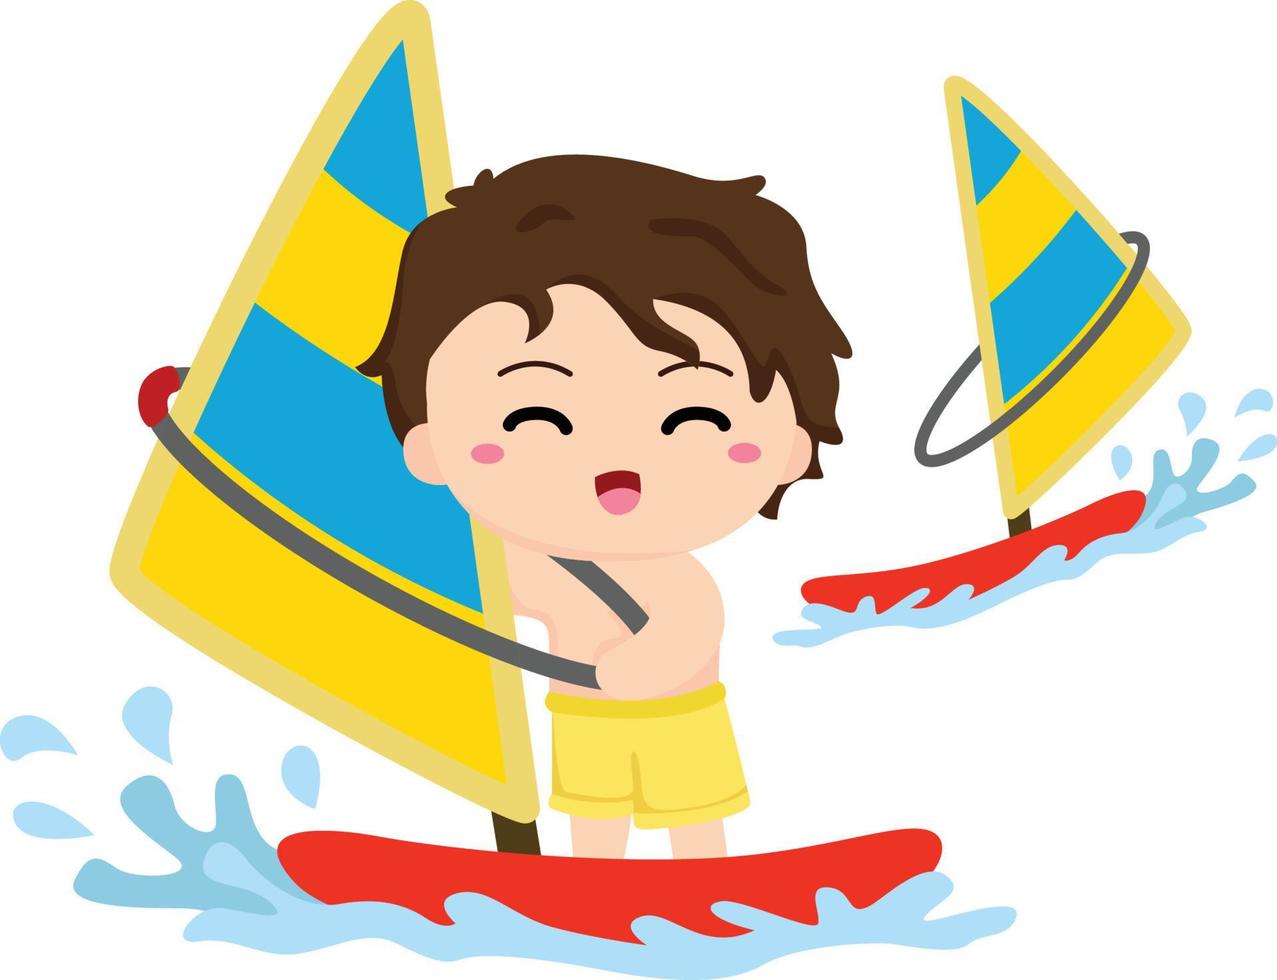 Sailing in the Sea Vector Illustrations